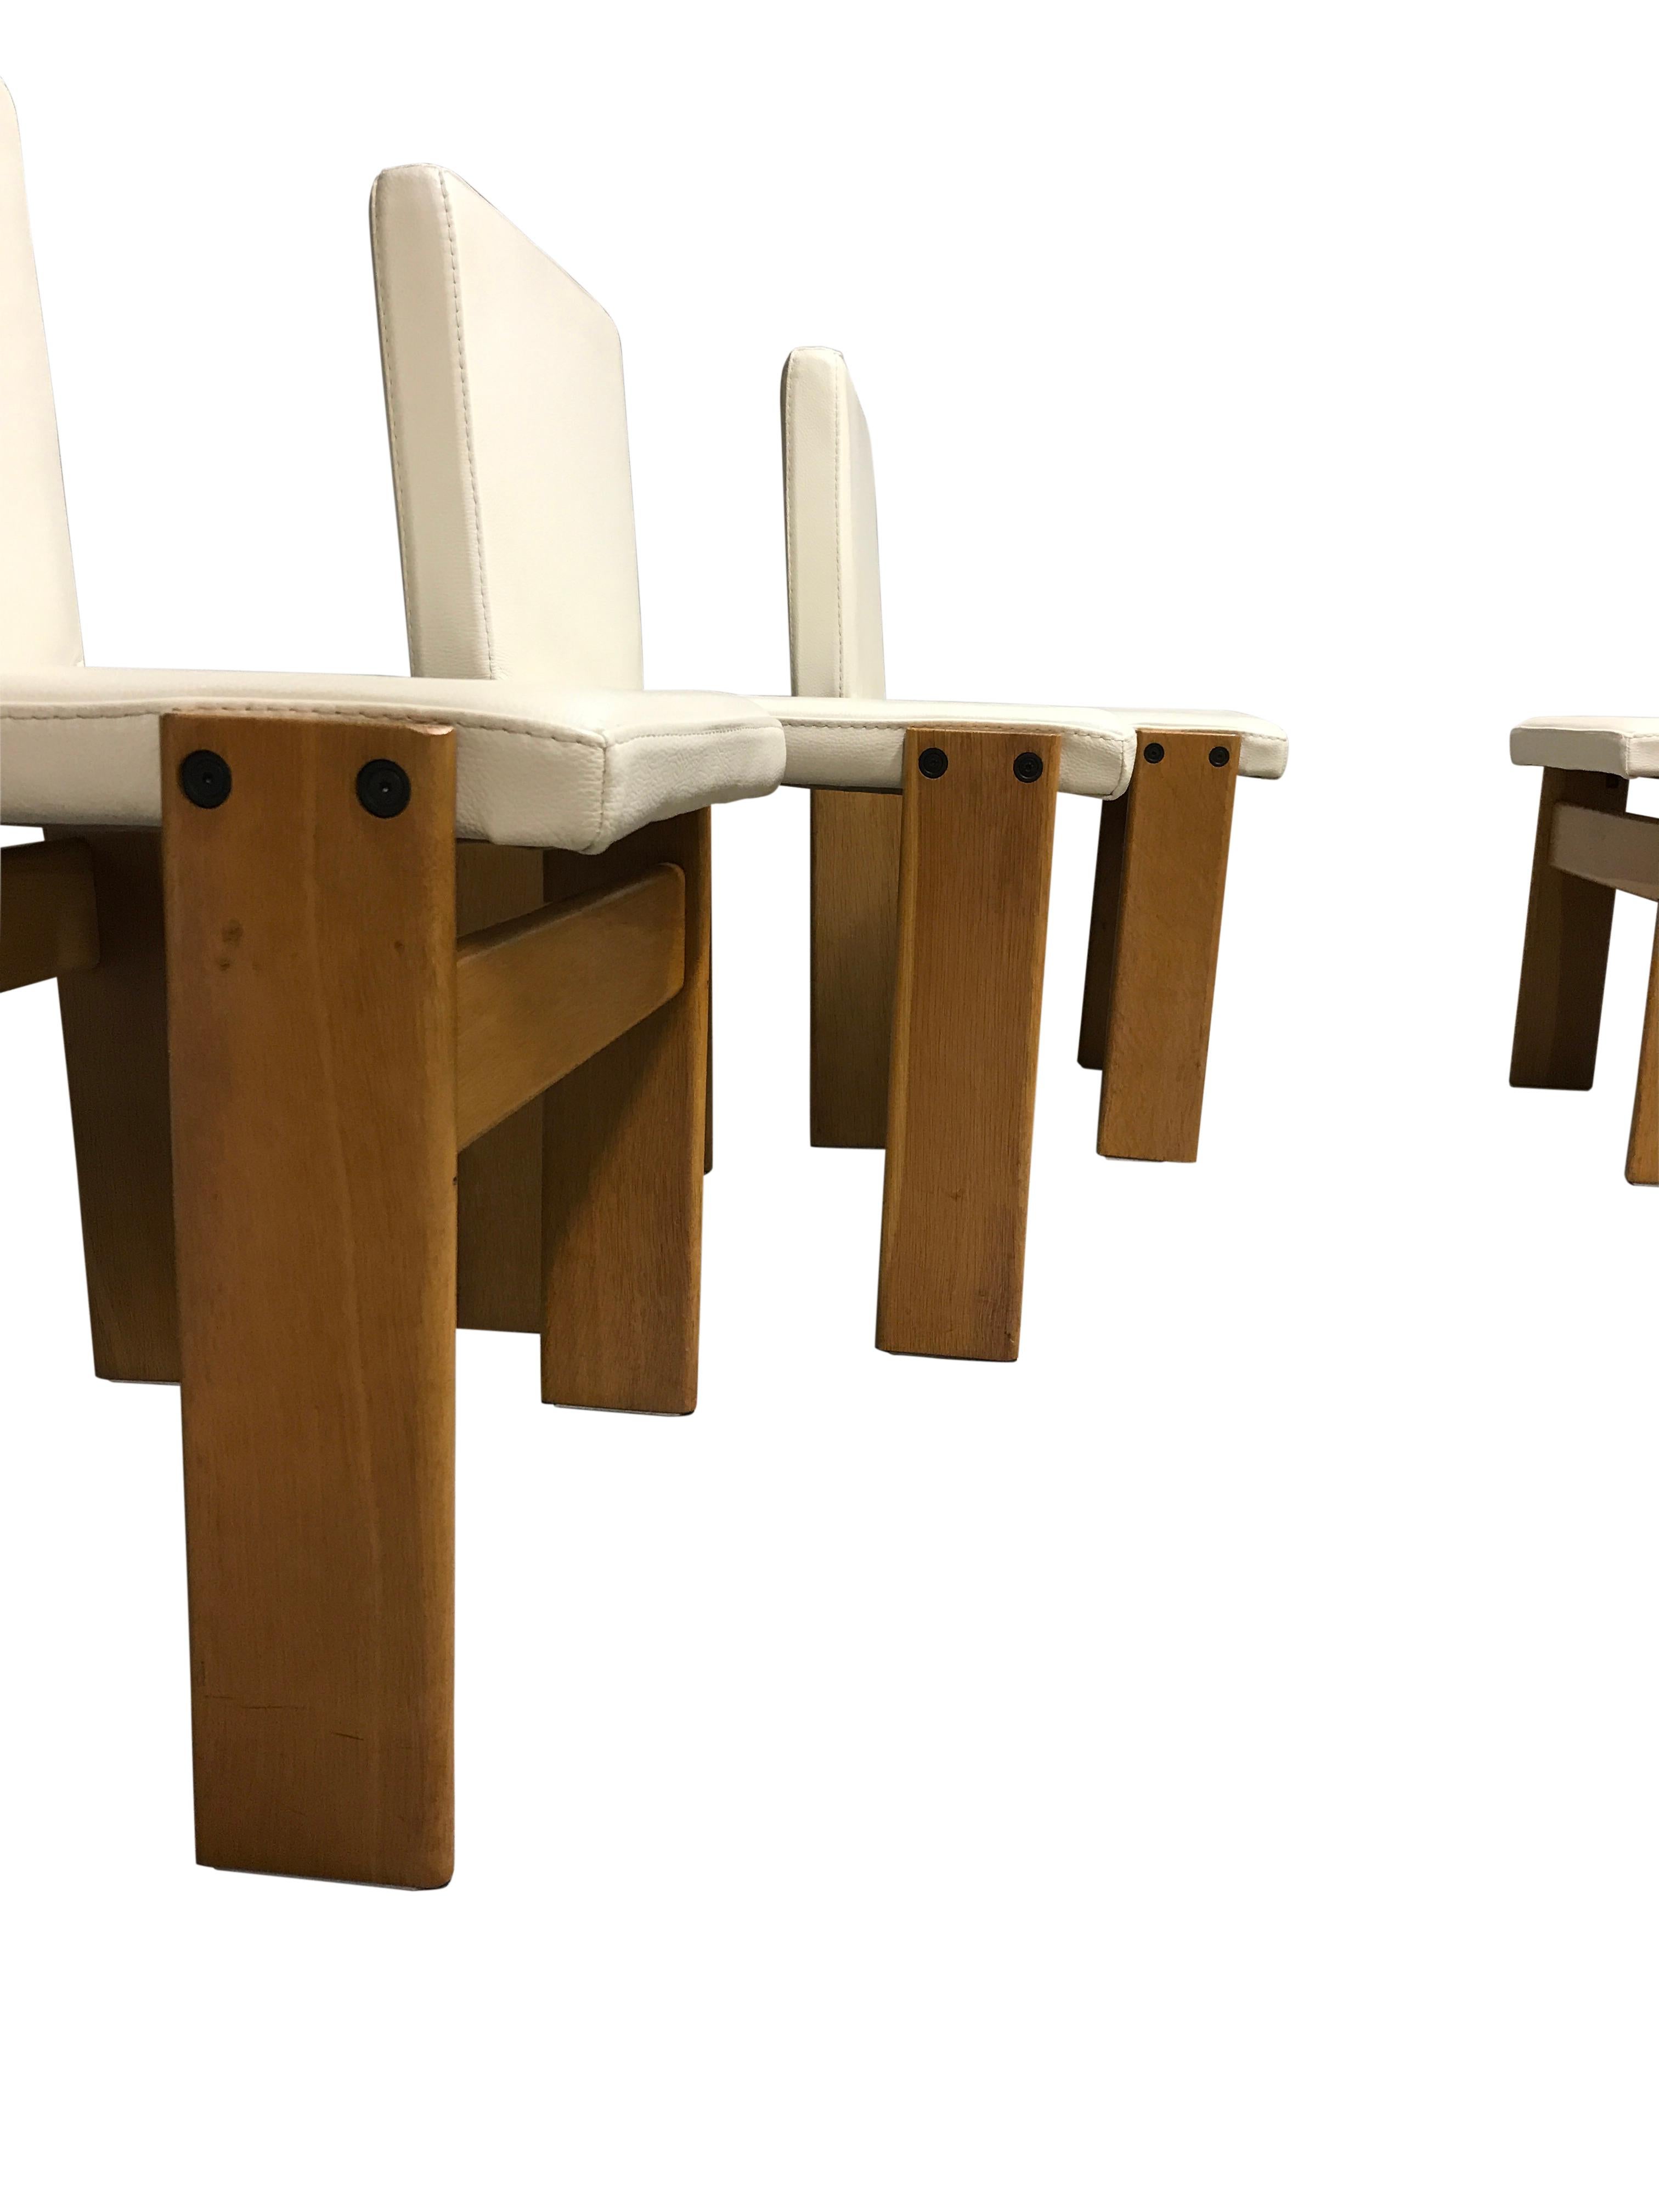 Italian Tobia & Afra Scarpa for Molteni Monk Chairs, Set of 6, 1970s